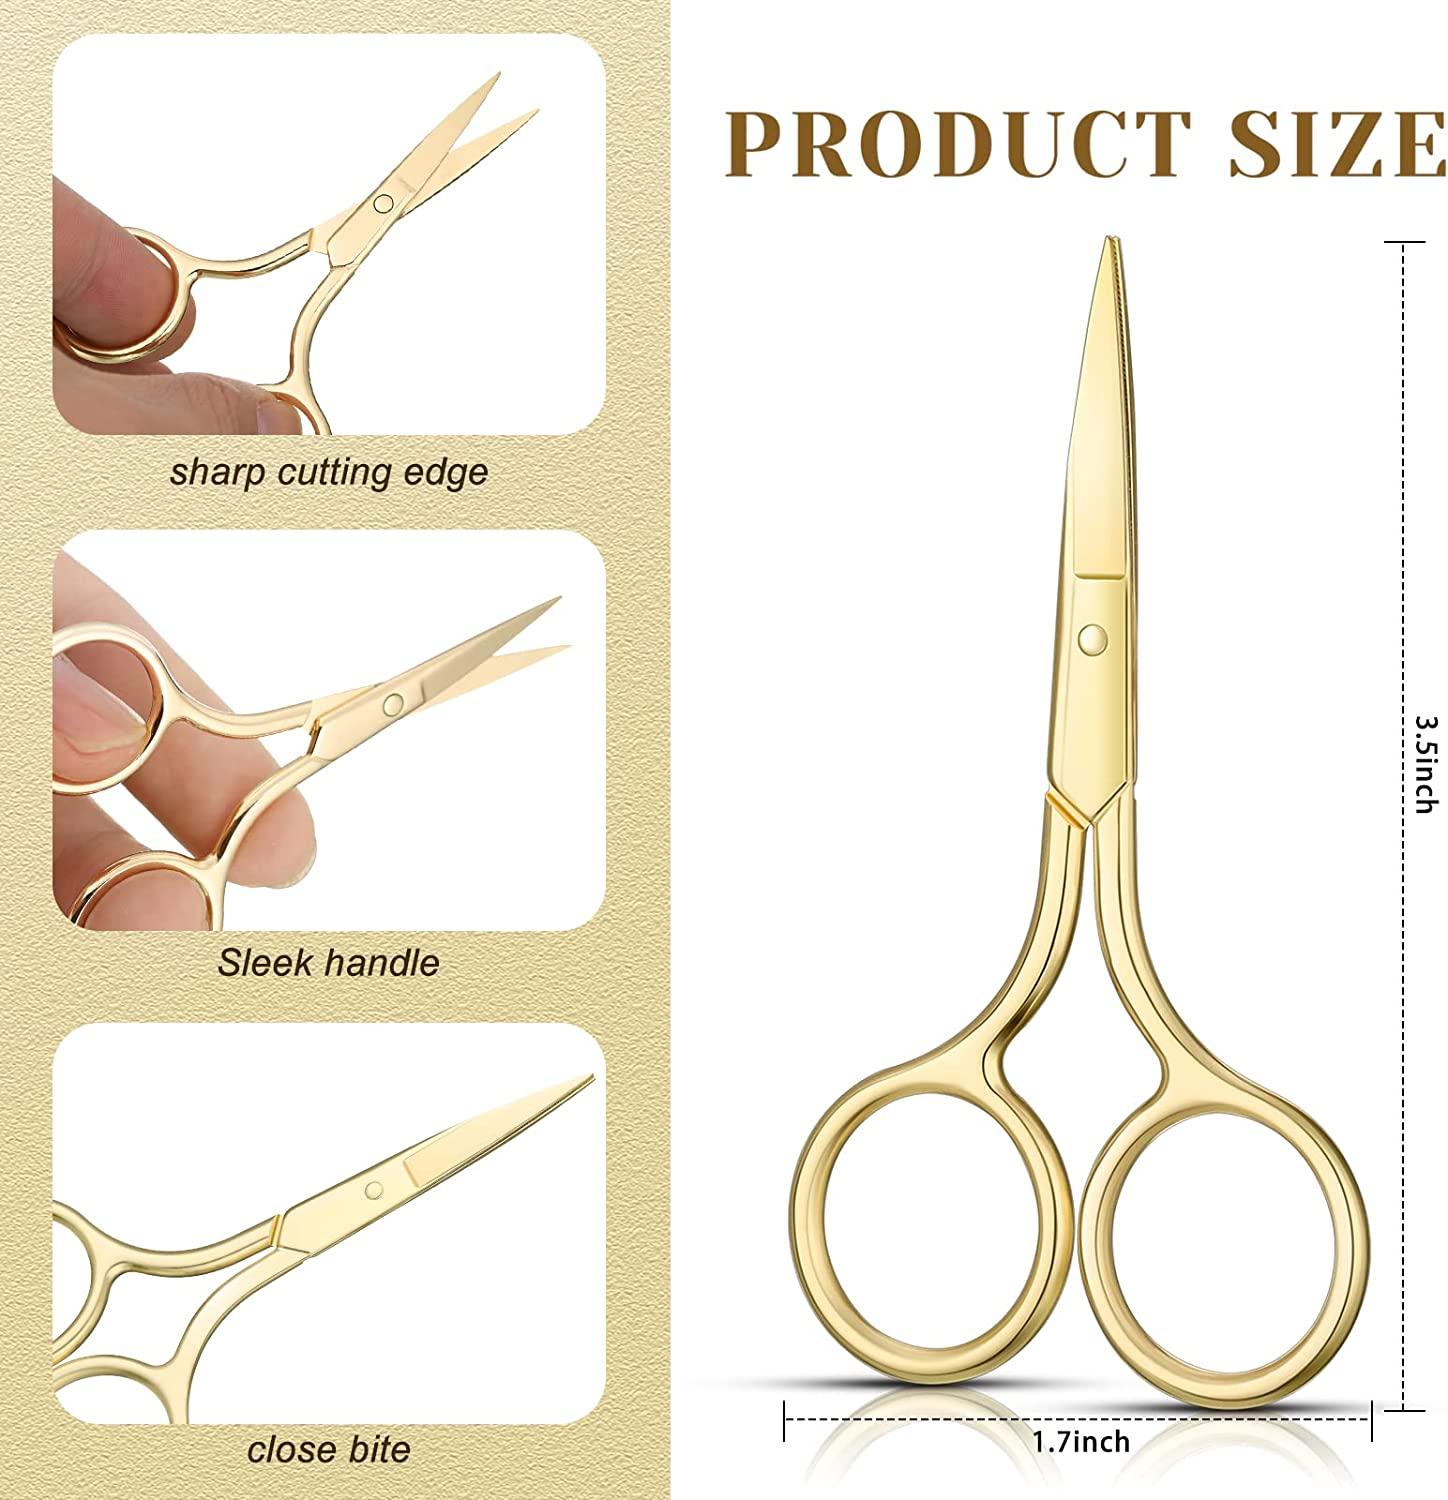 5 Pieces Small Straight Tip Nose Hair Scissor for Grooming, Stainless Steel  Multi-Purpose Beauty Grooming Scissors for Facial Hair Removal and Hair  Mustache Beard Eyebrows Ear Nose Trimming (Gold)